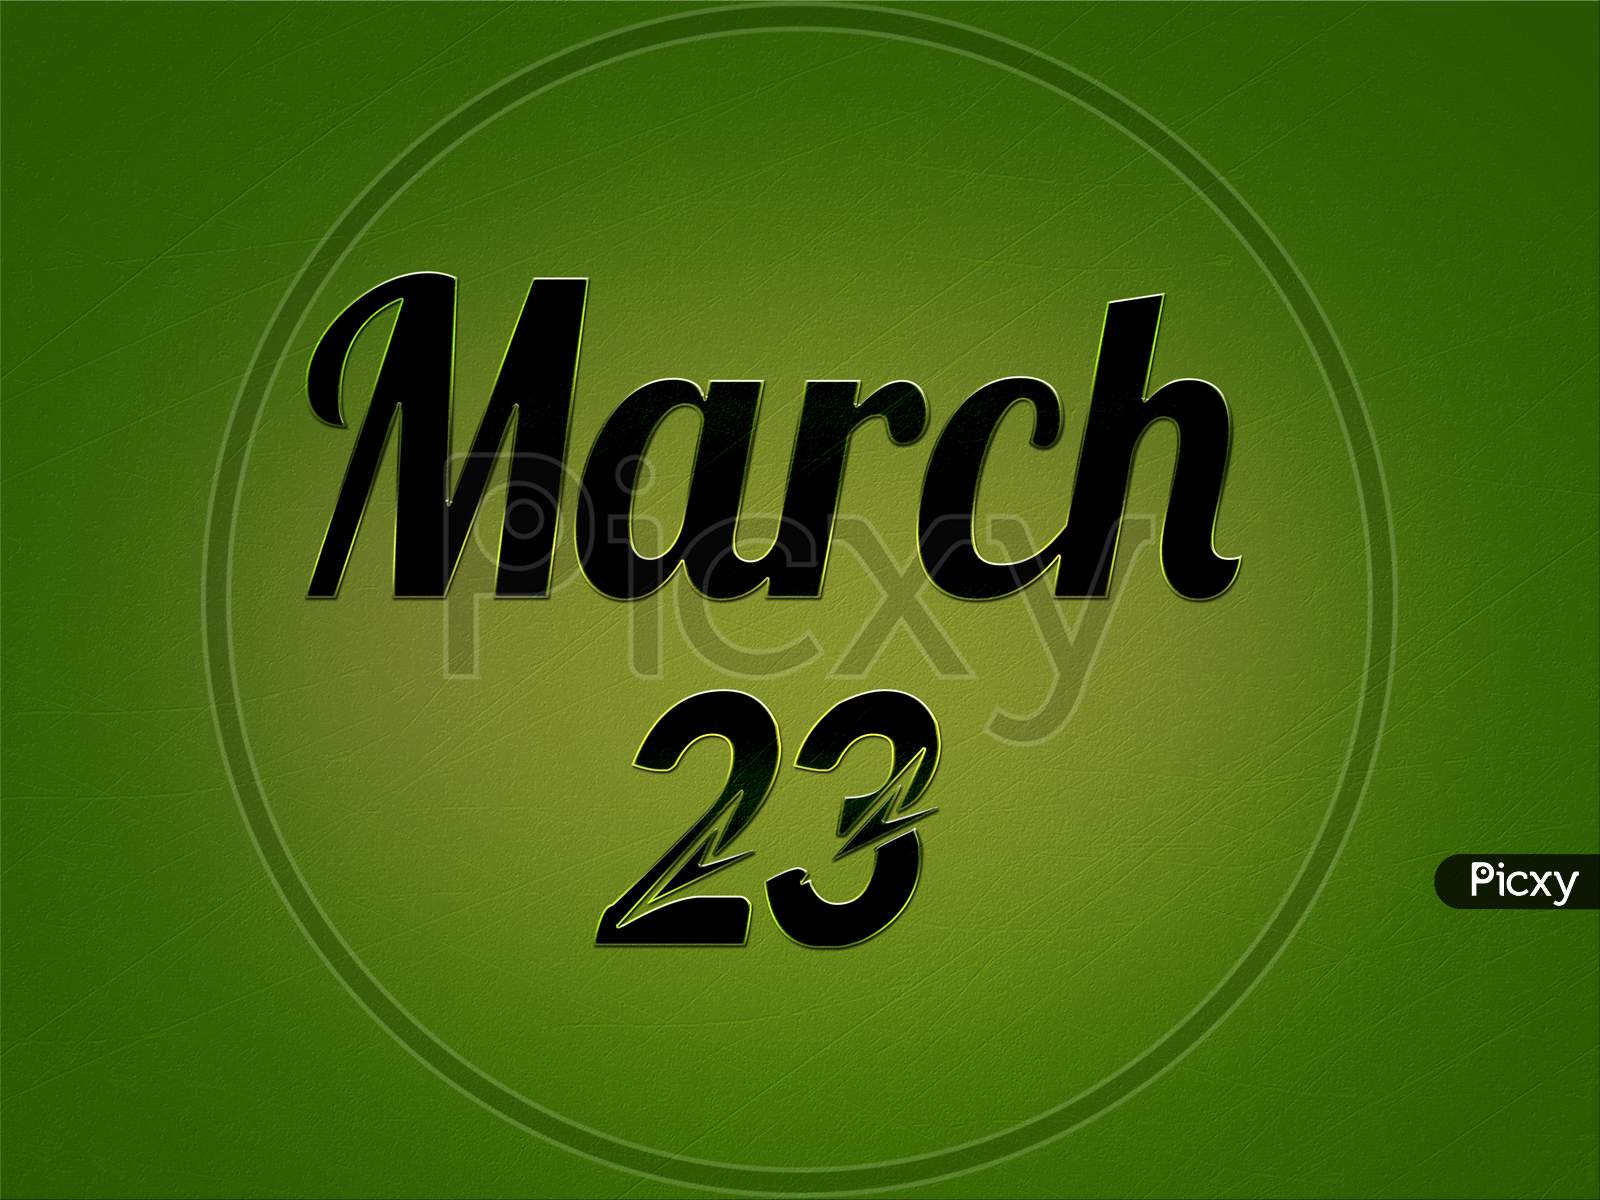 23 March, Monthly Calendar. Text Effect On Green Background